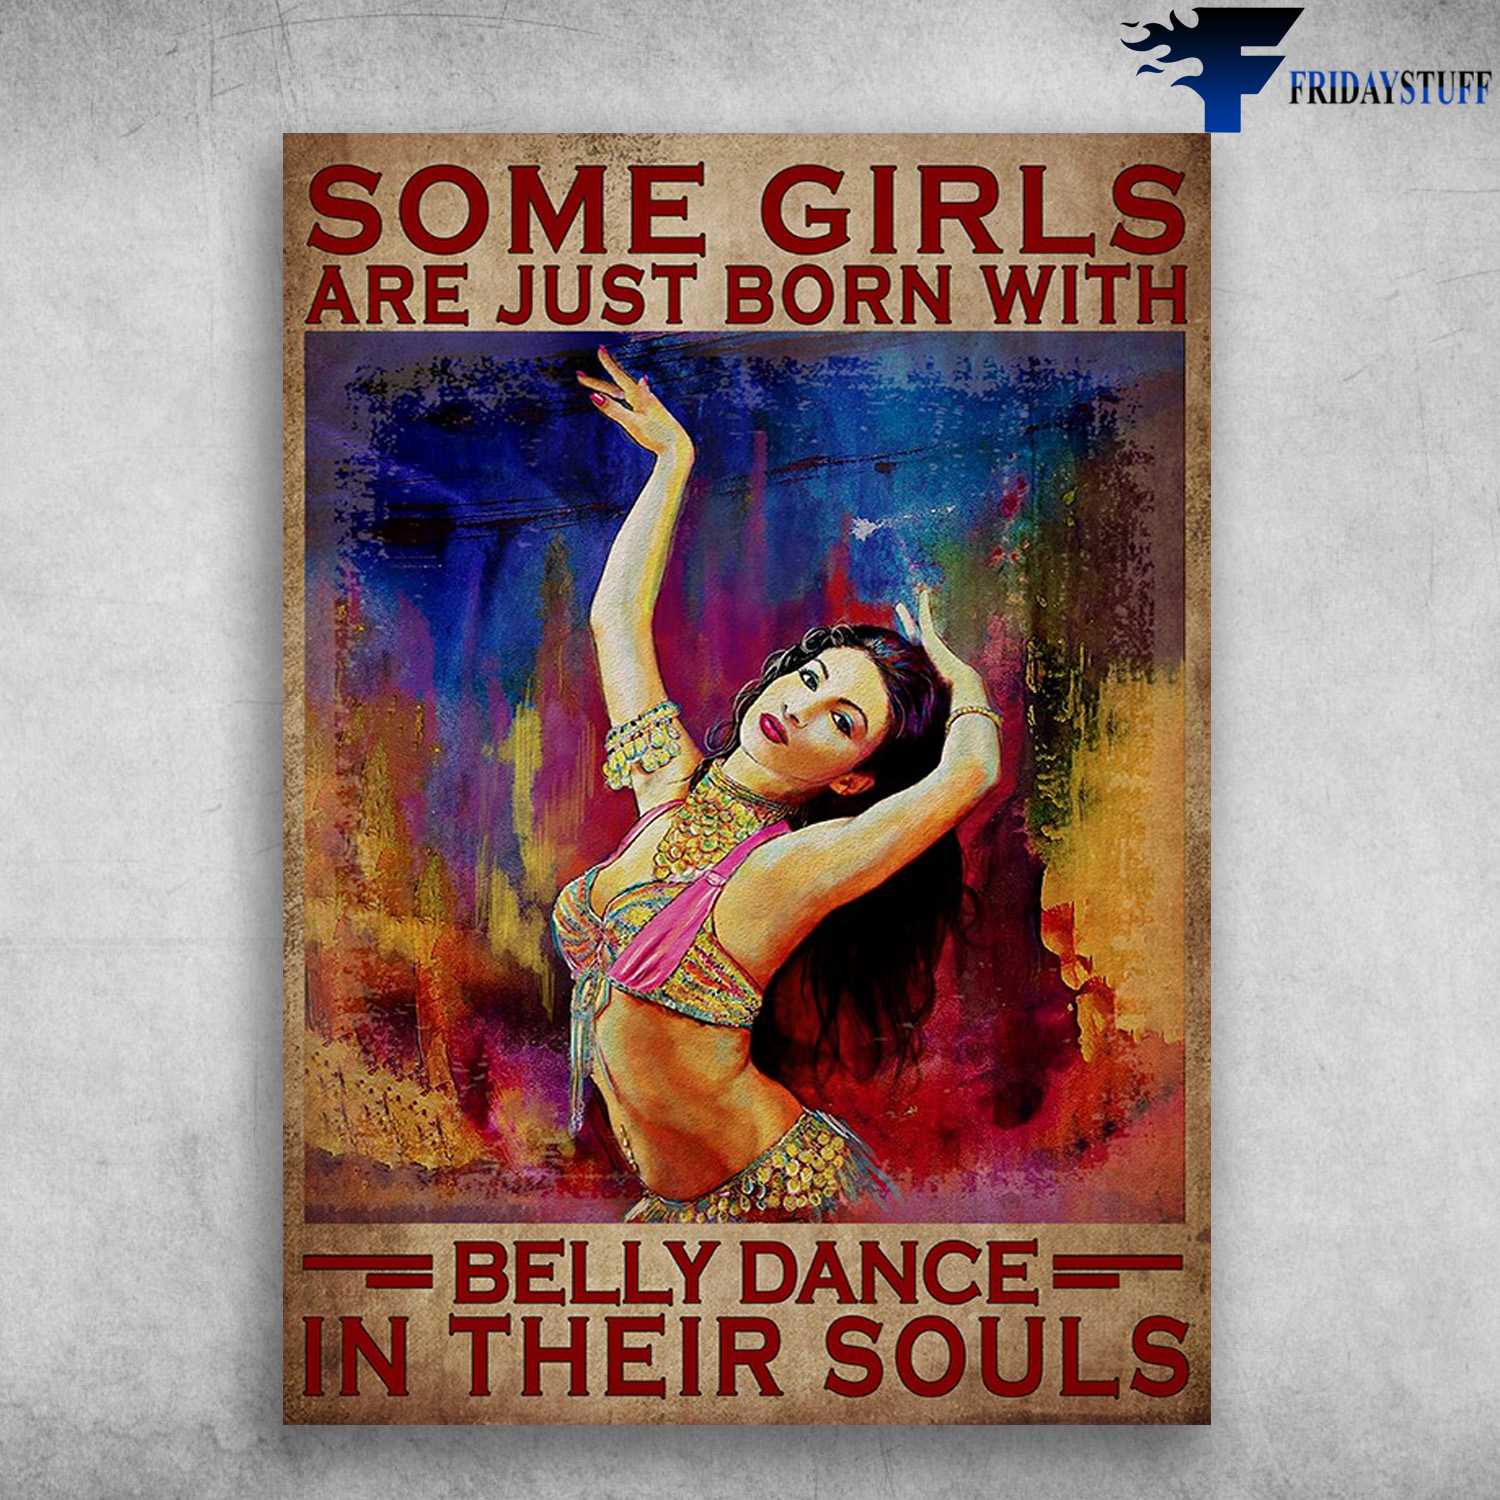 Belly Dancing Girl - Some Girls Are Just Born With, Belly Dance In Their Souls